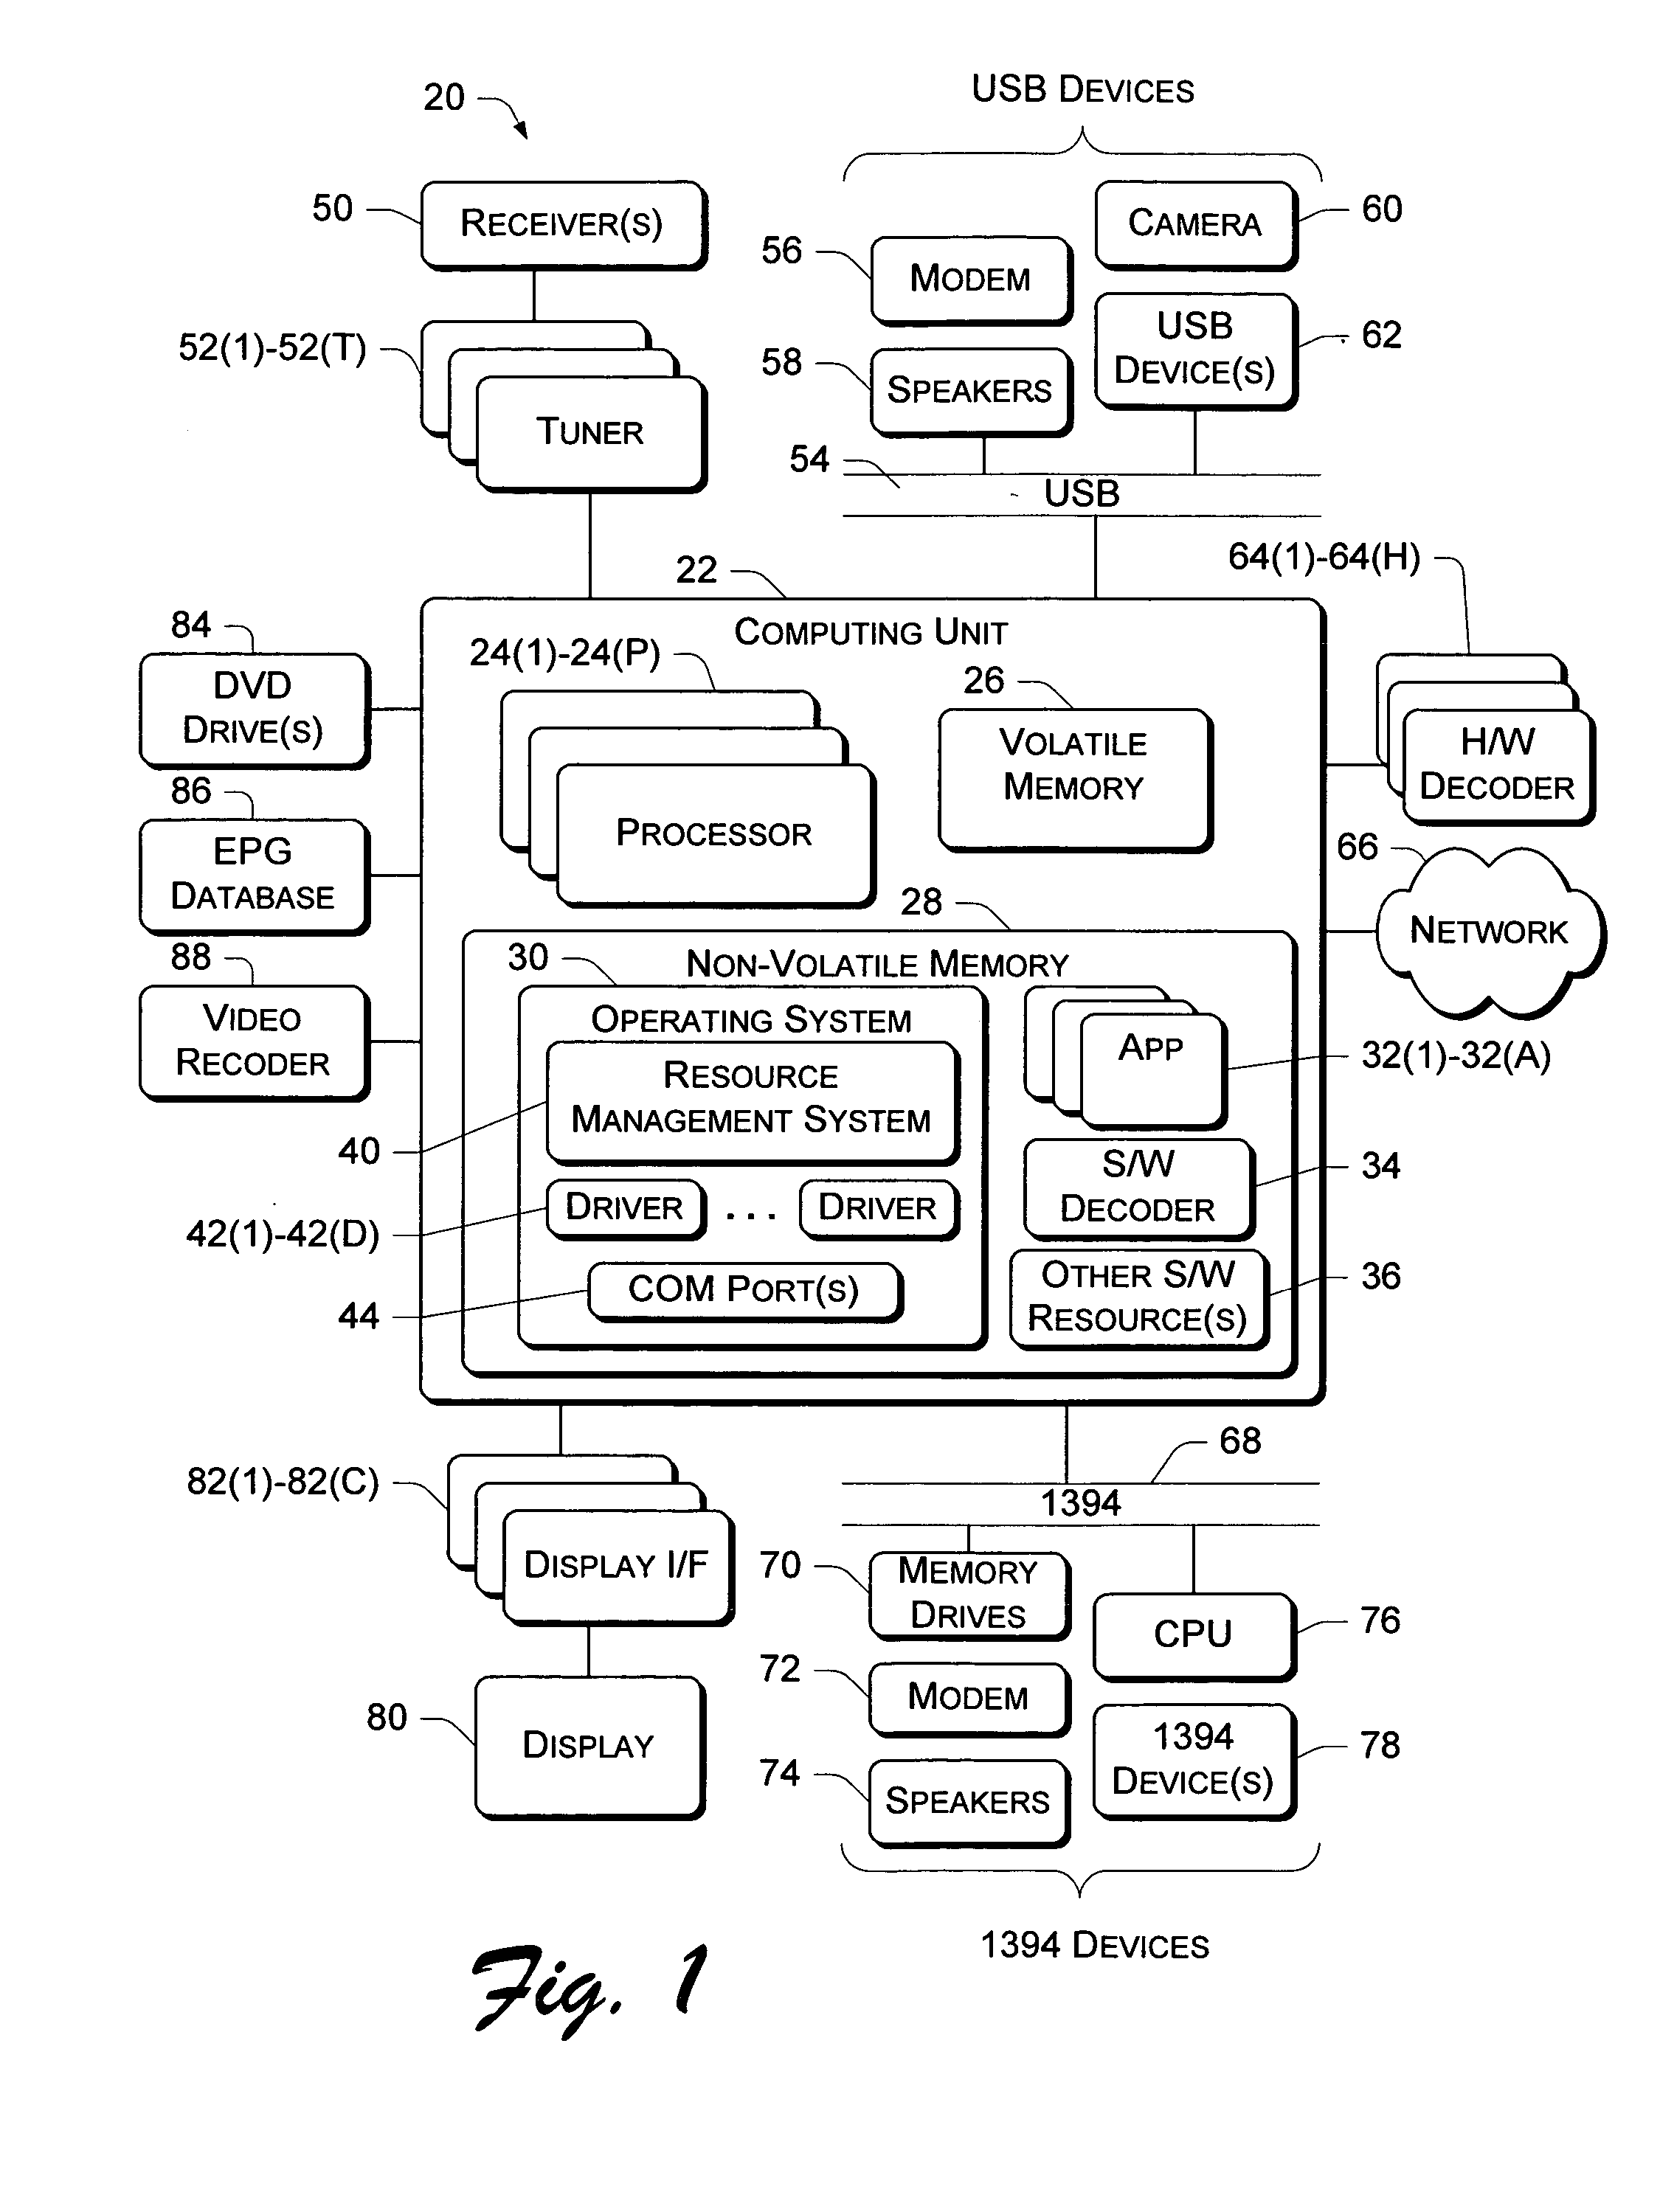 Resource manager architecture